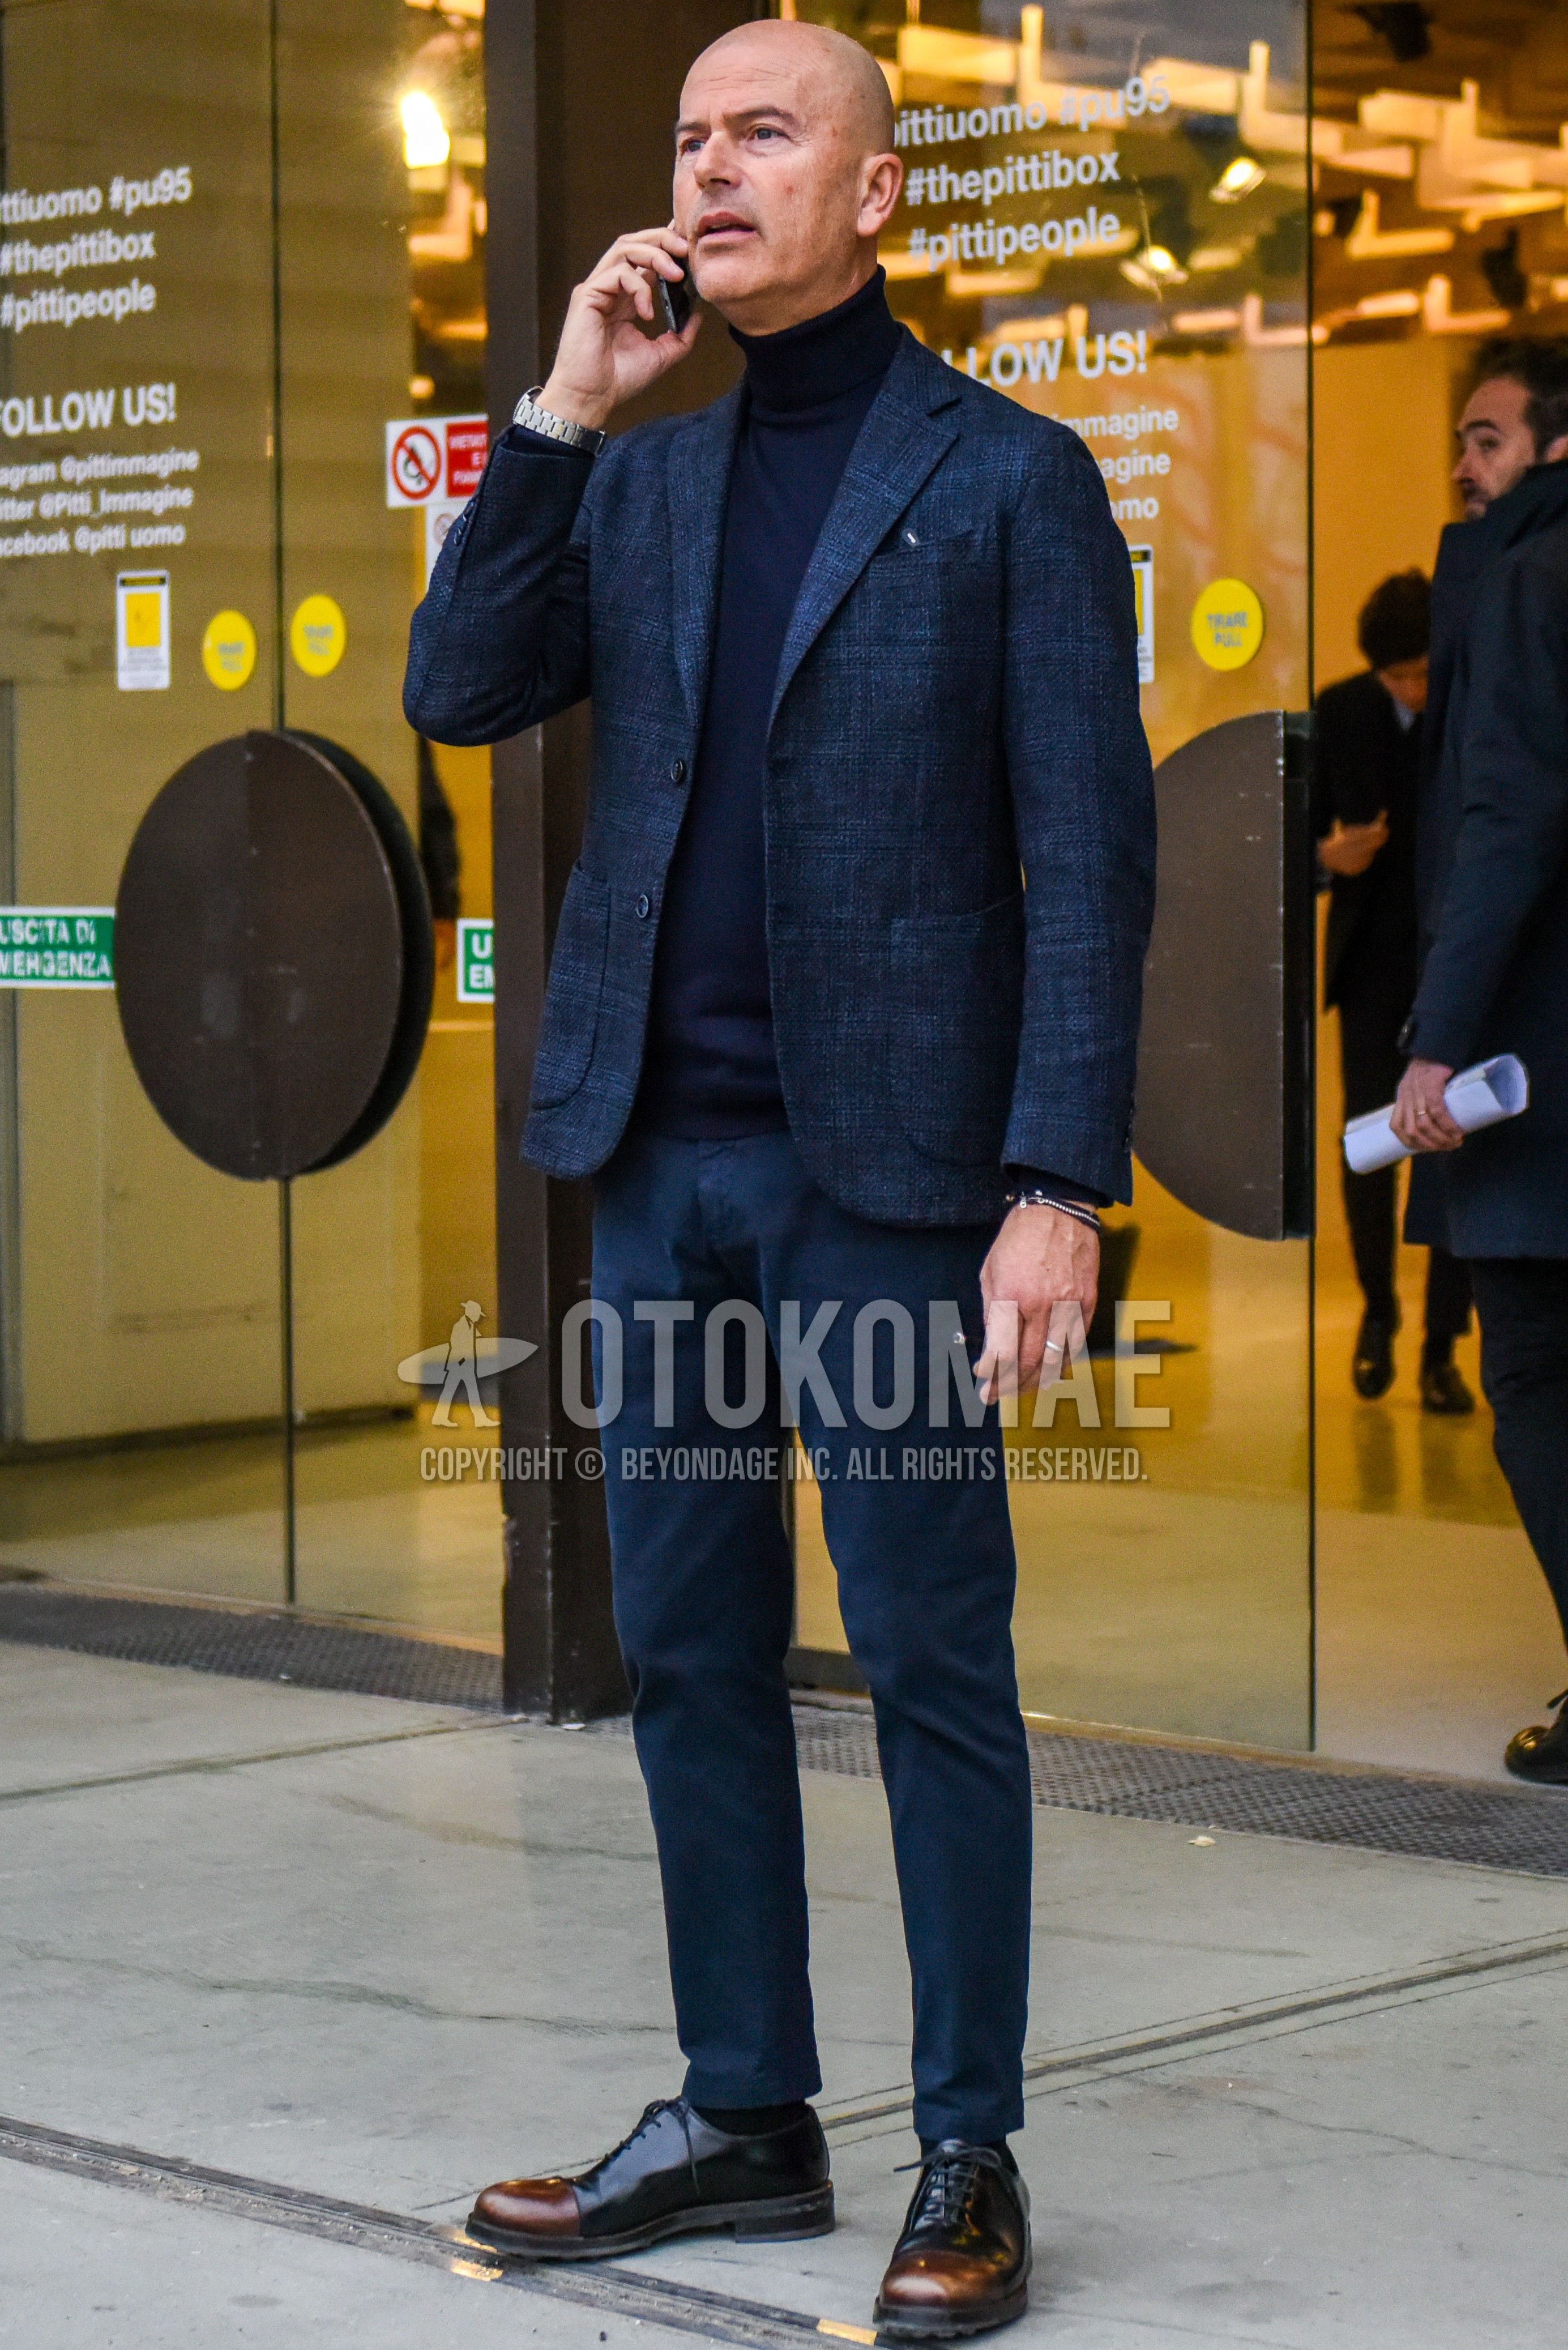 Men's spring autumn outfit with navy outerwear tailored jacket, navy plain turtleneck knit, black plain cotton pants, black plain socks, black brown straight-tip shoes leather shoes.